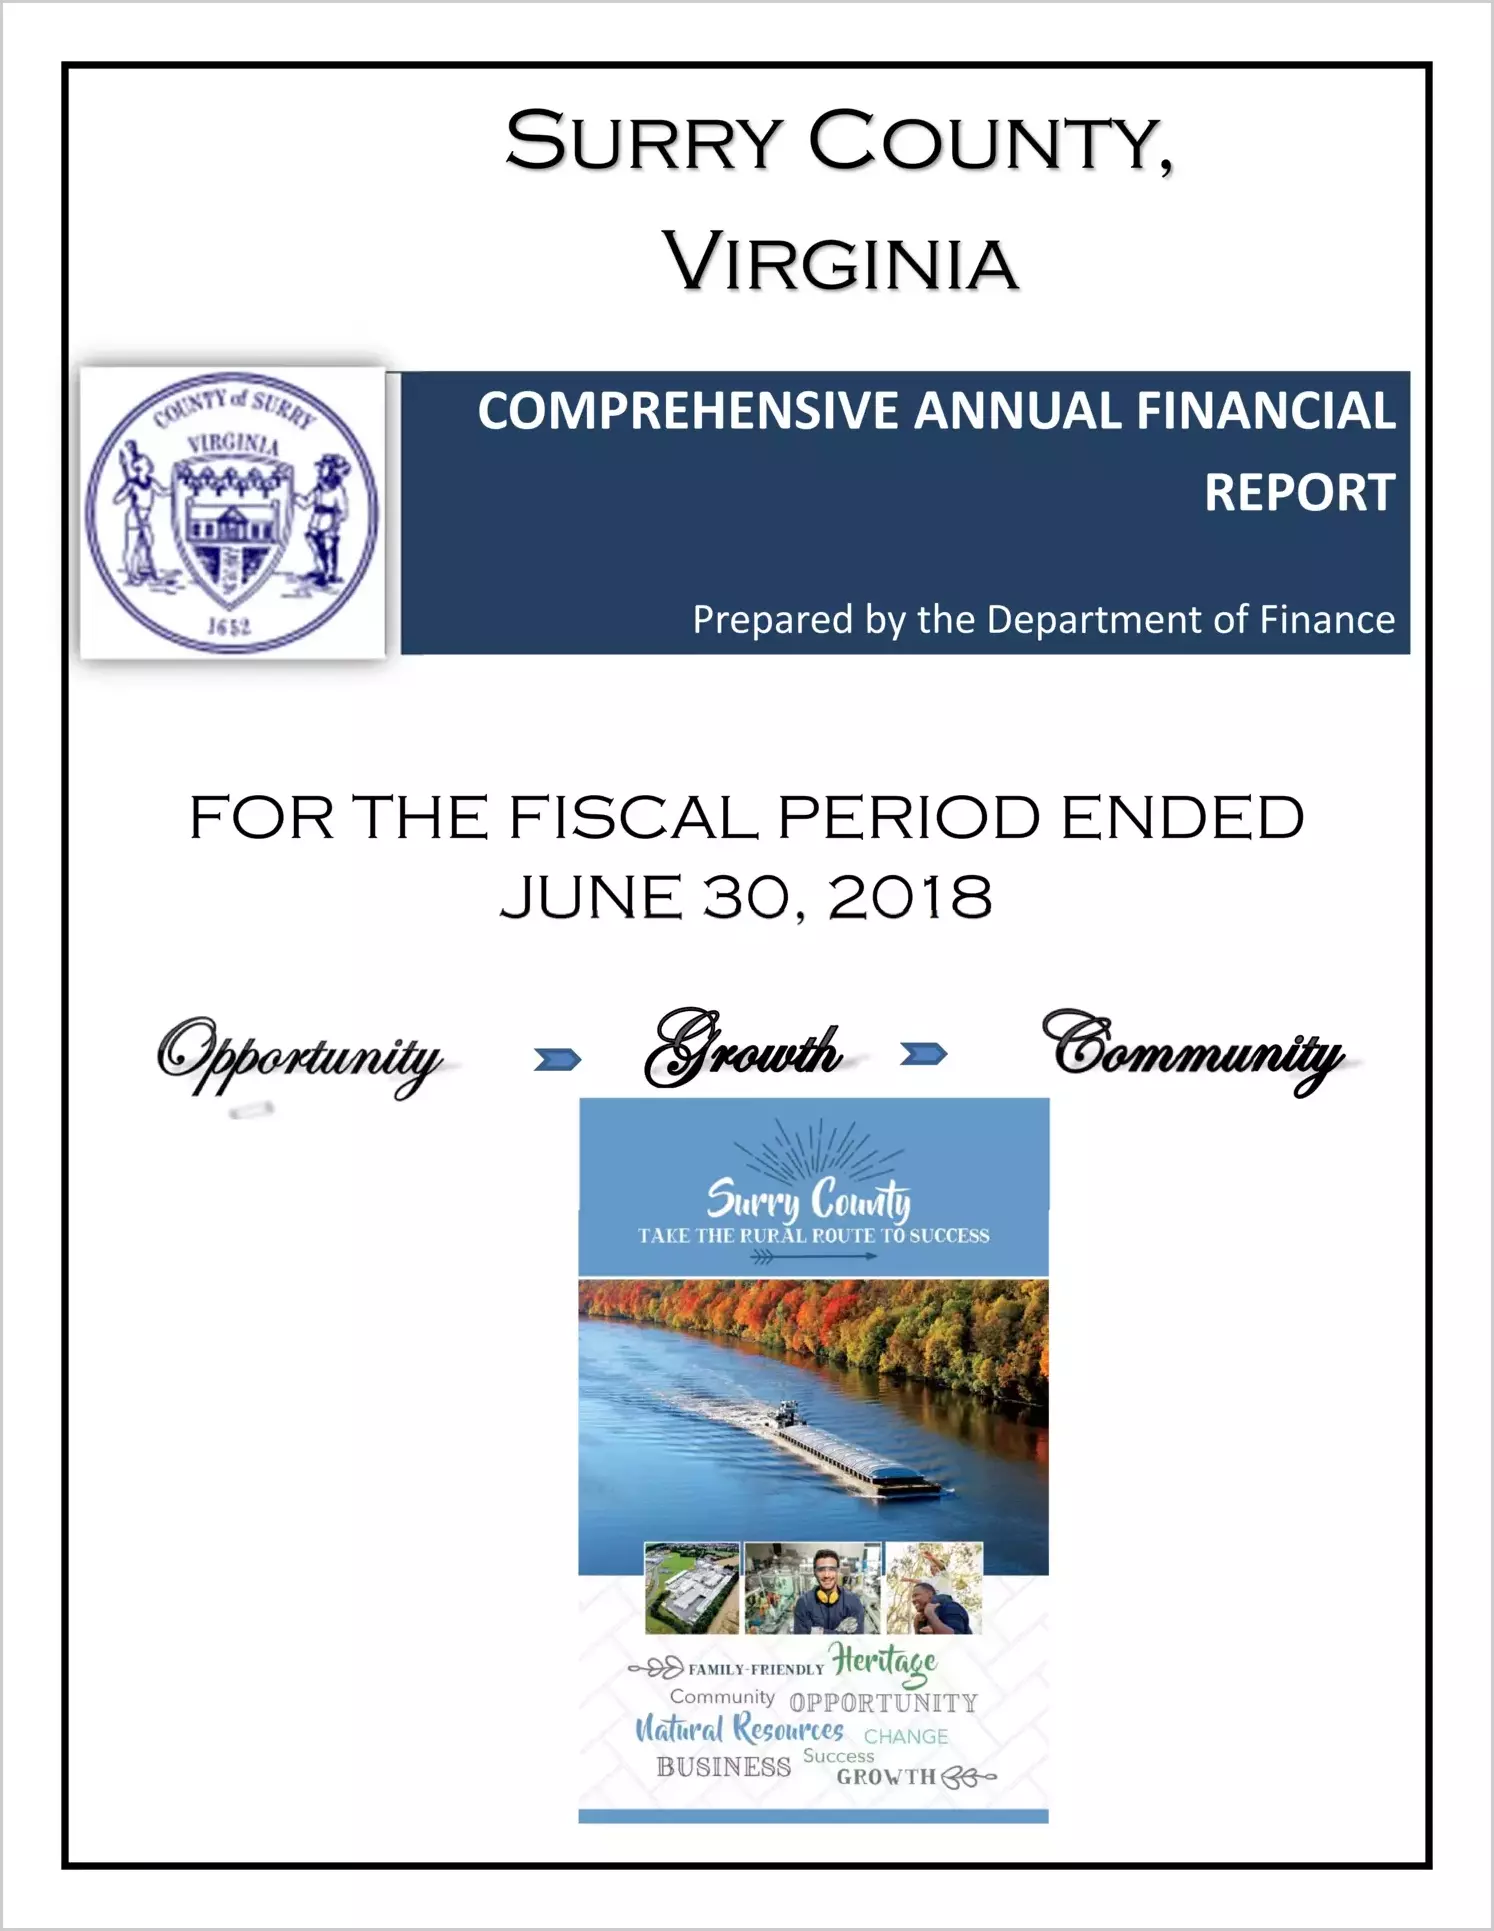 2018 Annual Financial Report for County of Surry